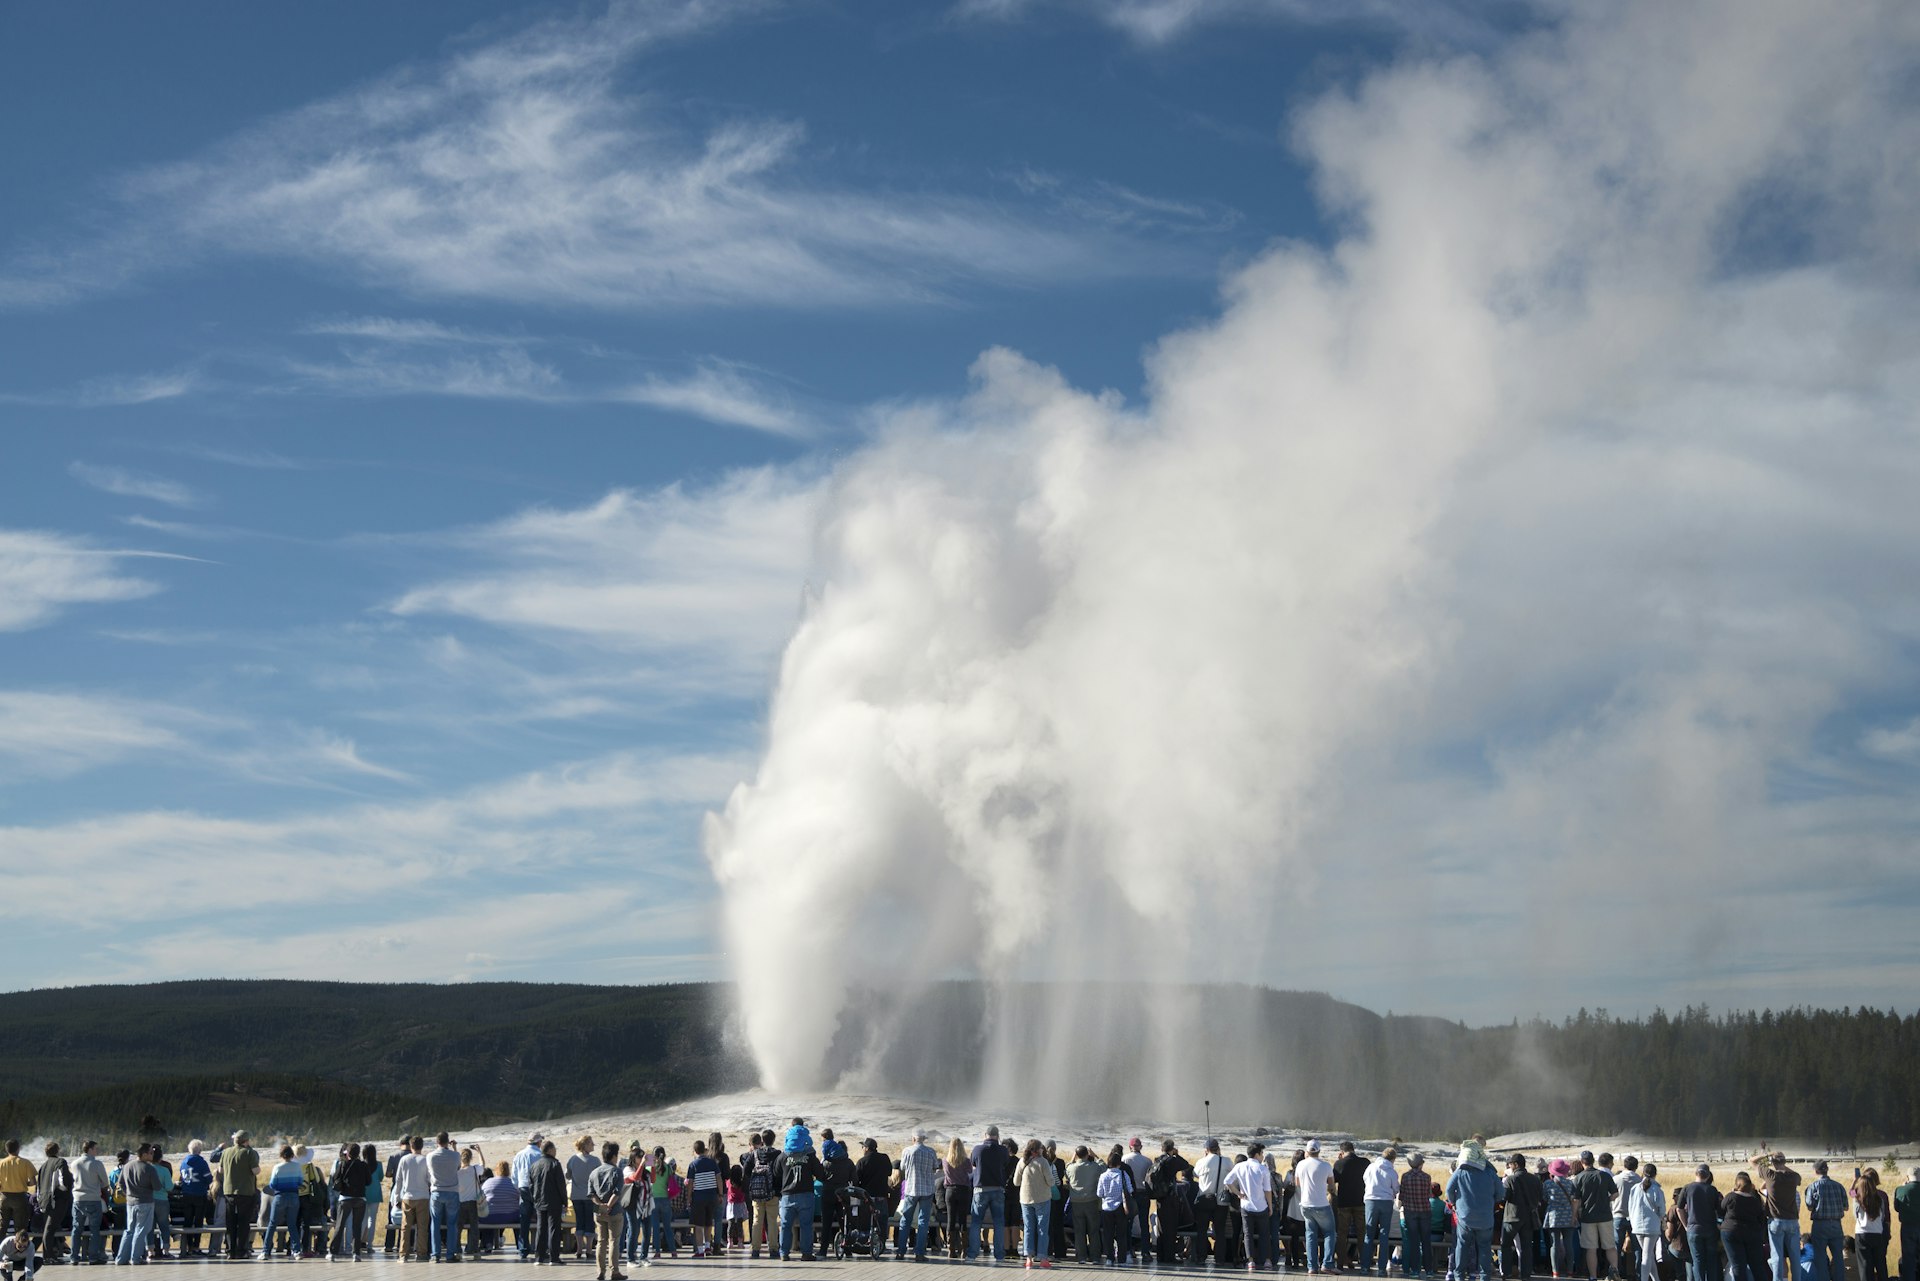 A line of people seen from behind, watching the Old Faithful geyser erupt against cloudy blue sky